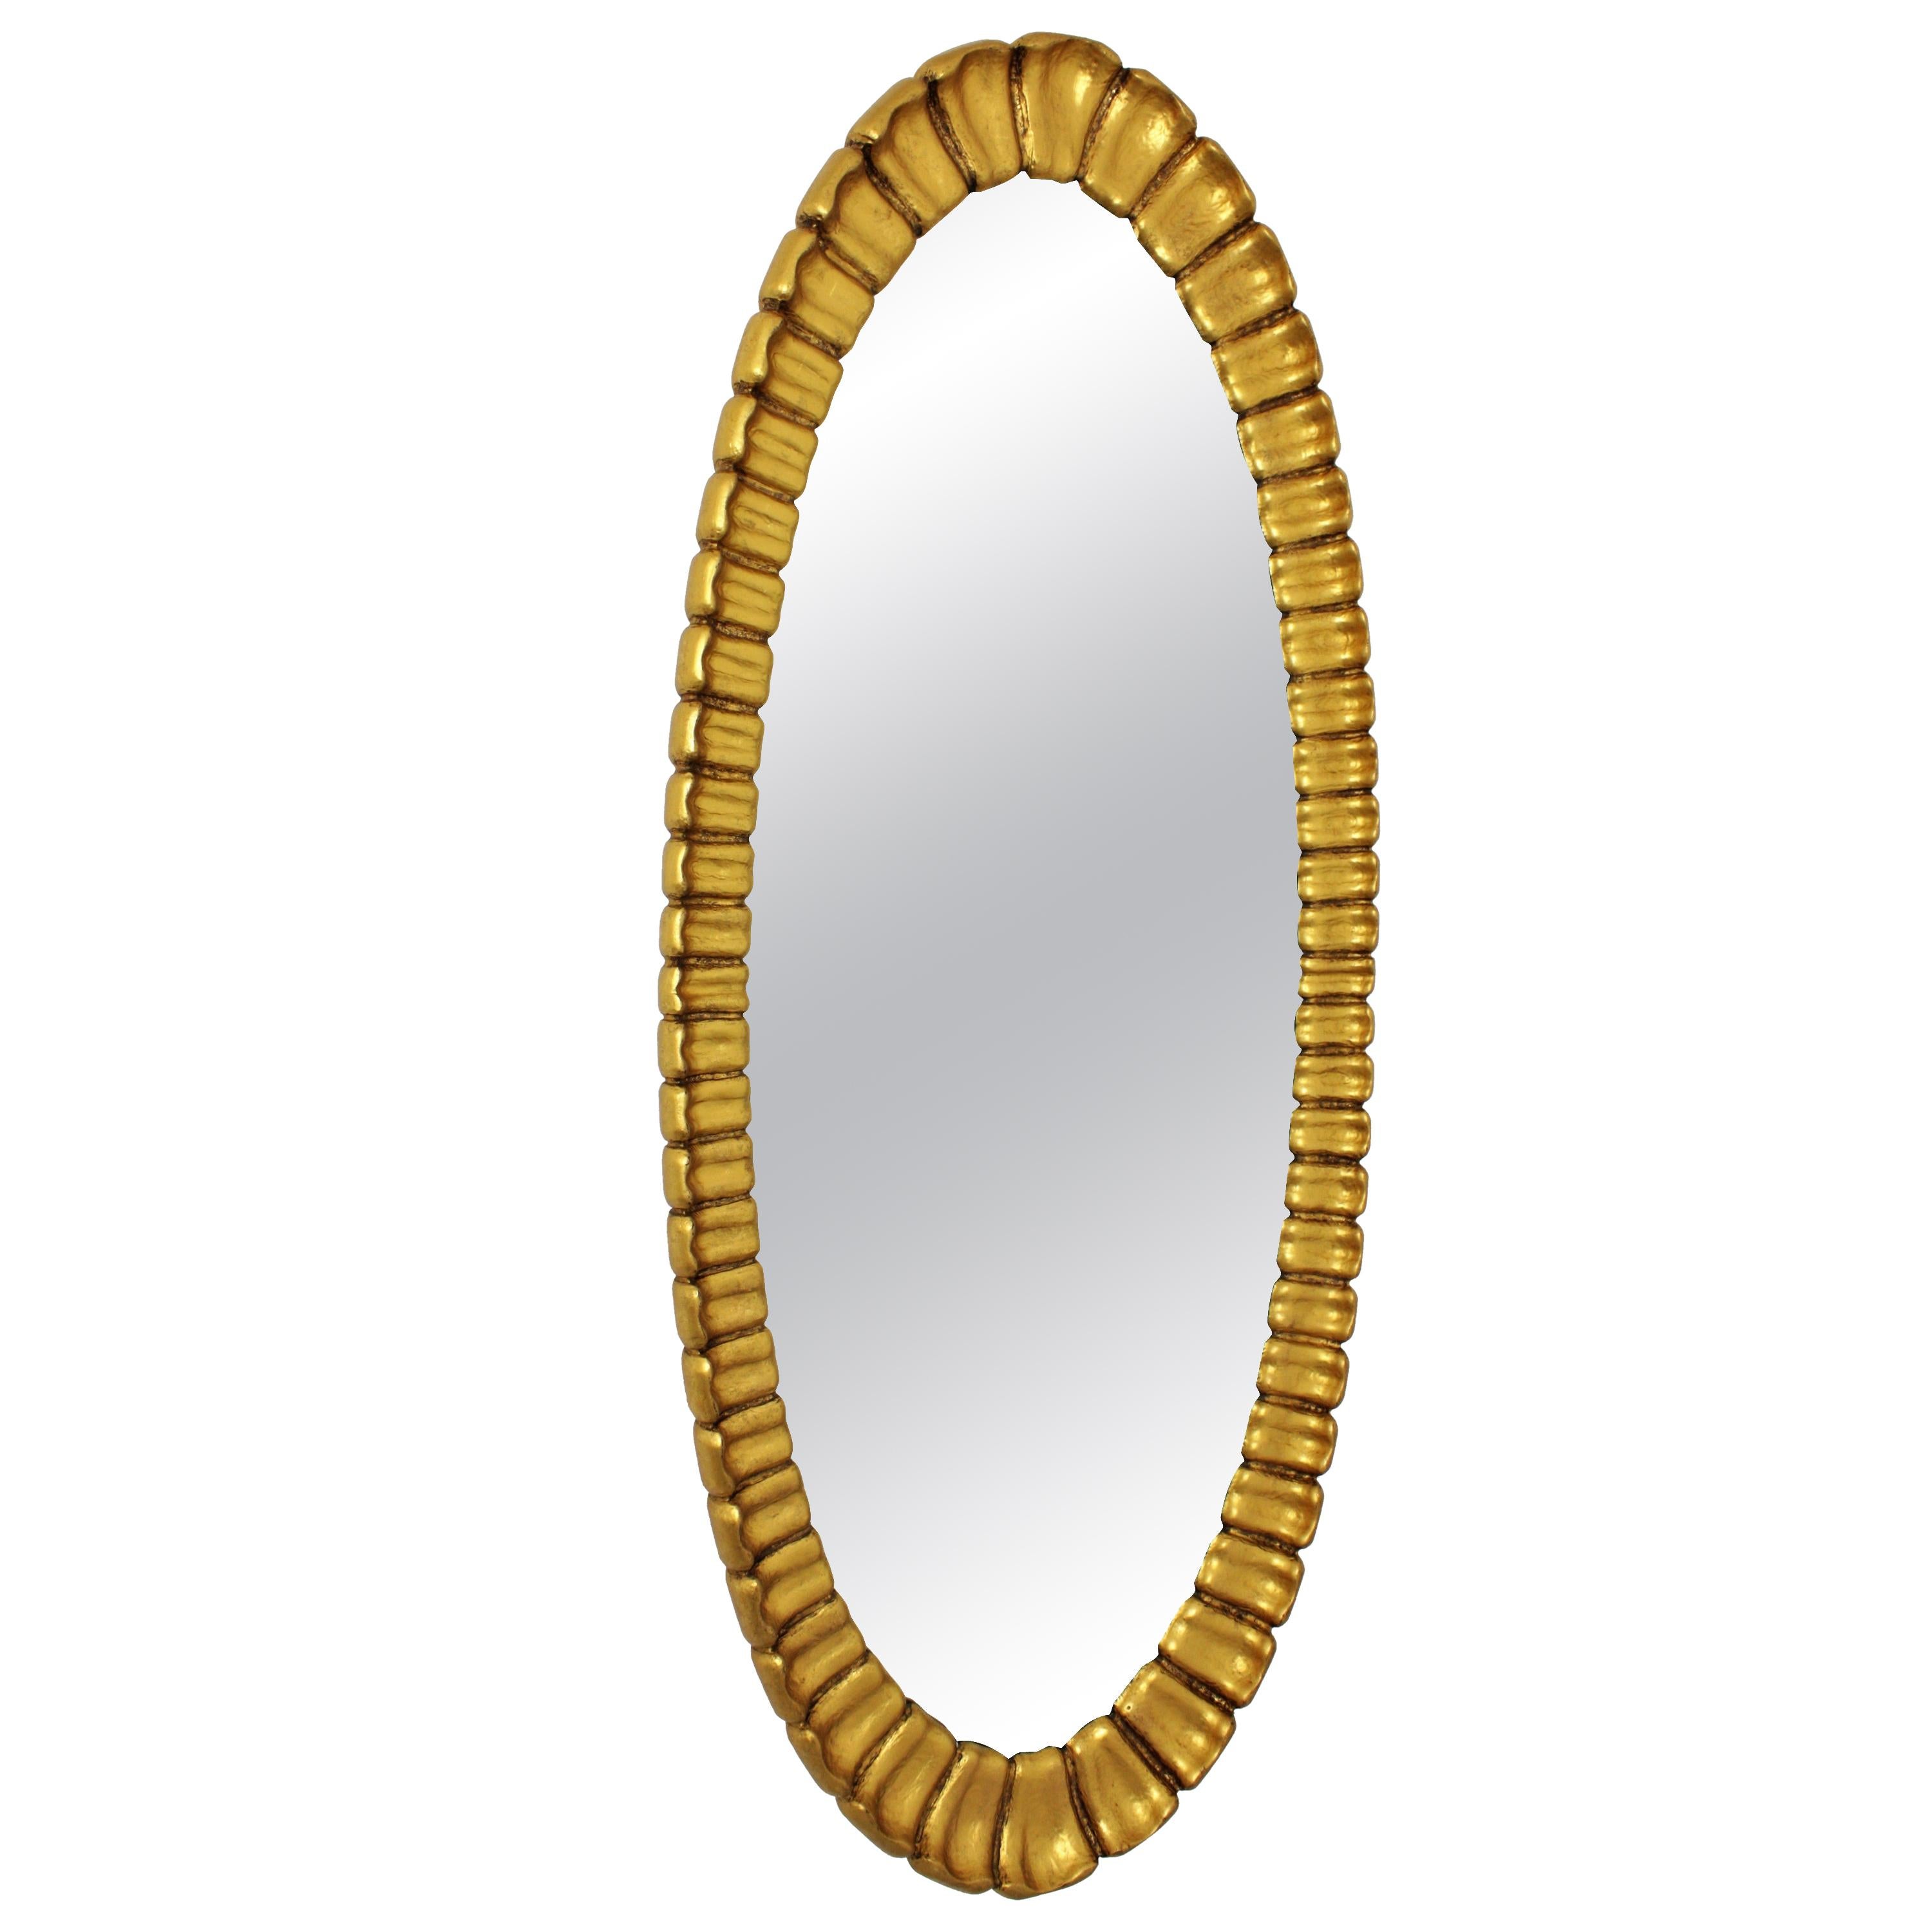 Large 1950s Hollywood Regency carved giltwood oval mirror with scalloped frame.
Designed and manufactured by Francisco Hurtado.
Labeled at the back.
This elegant mirror will be the perfect choice to add a luxury midcentury accent in a dressing